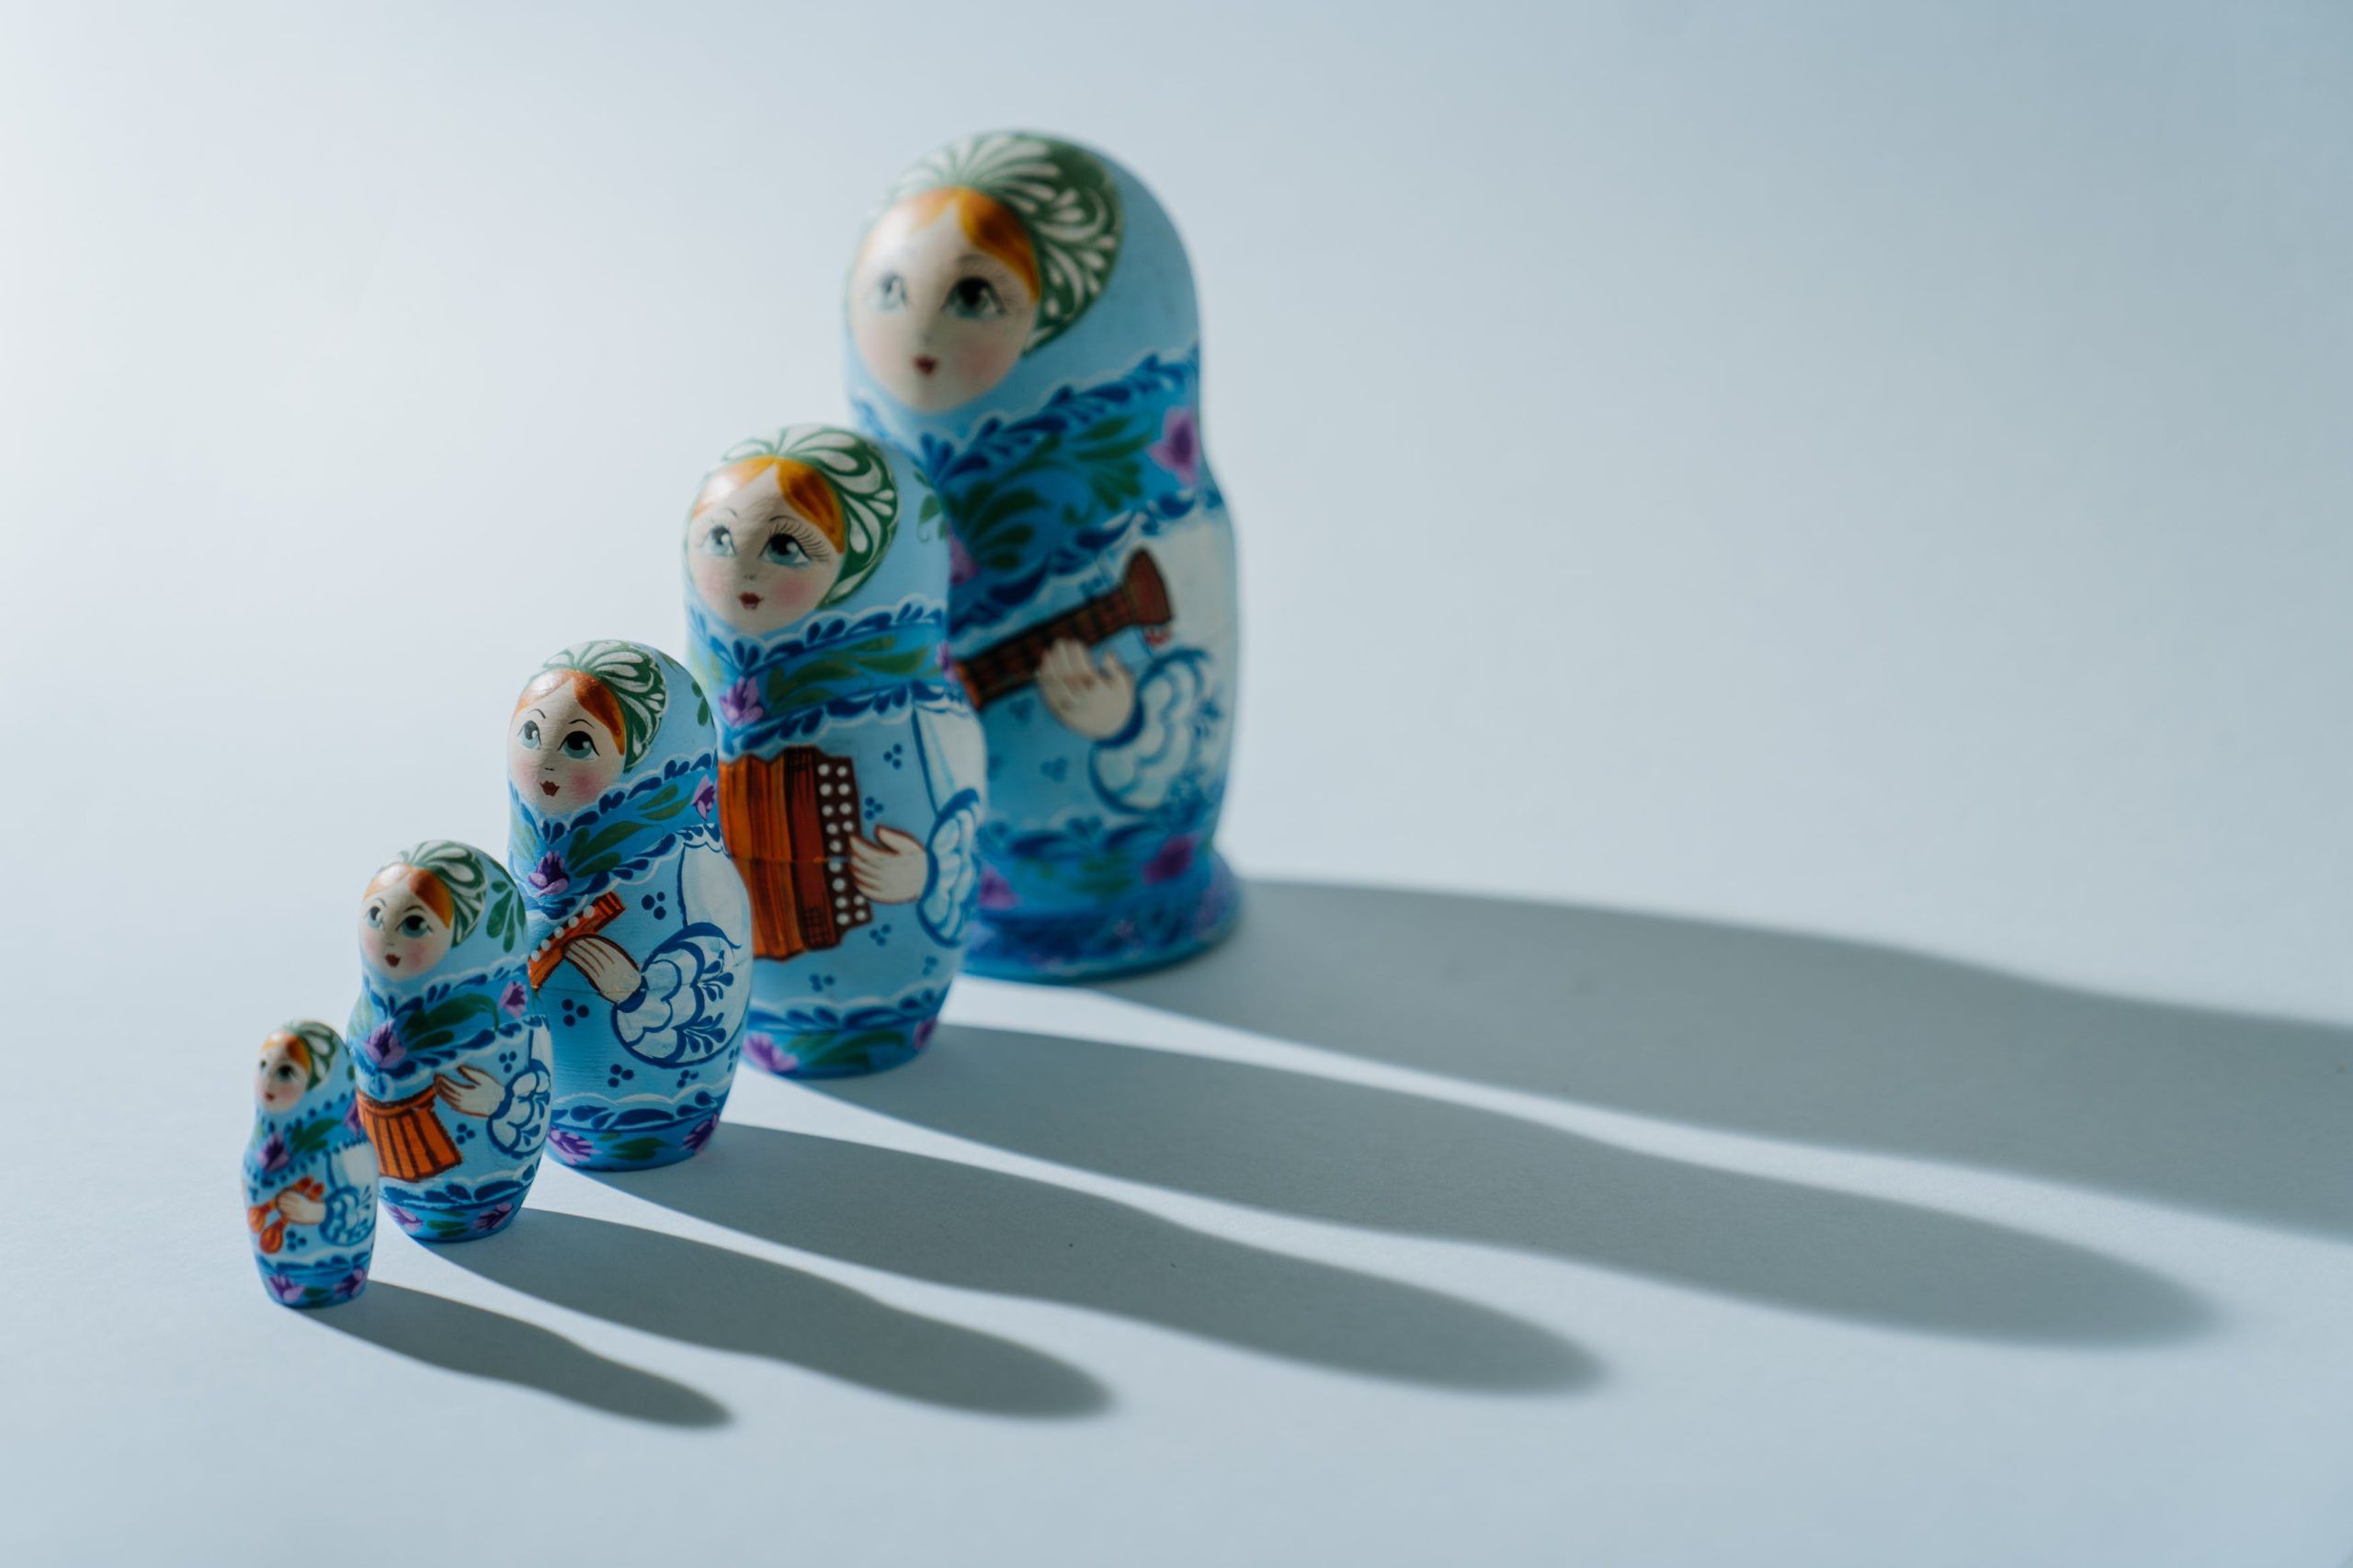 The Russian Dolls